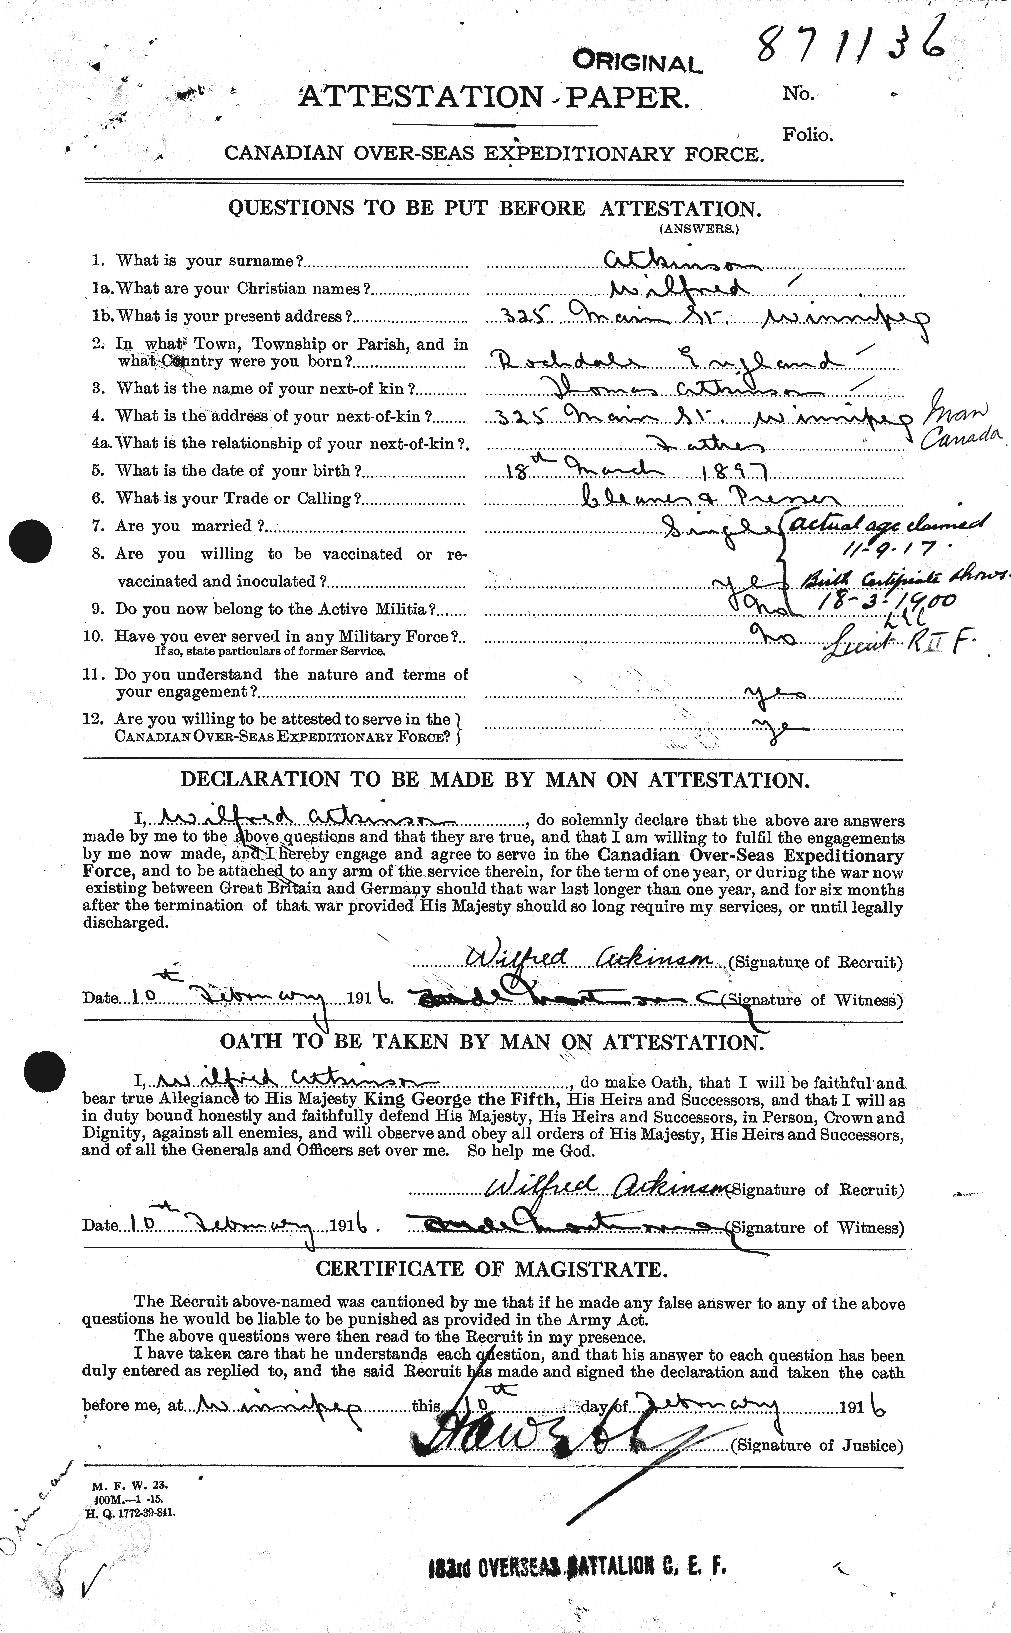 Personnel Records of the First World War - CEF 224225a